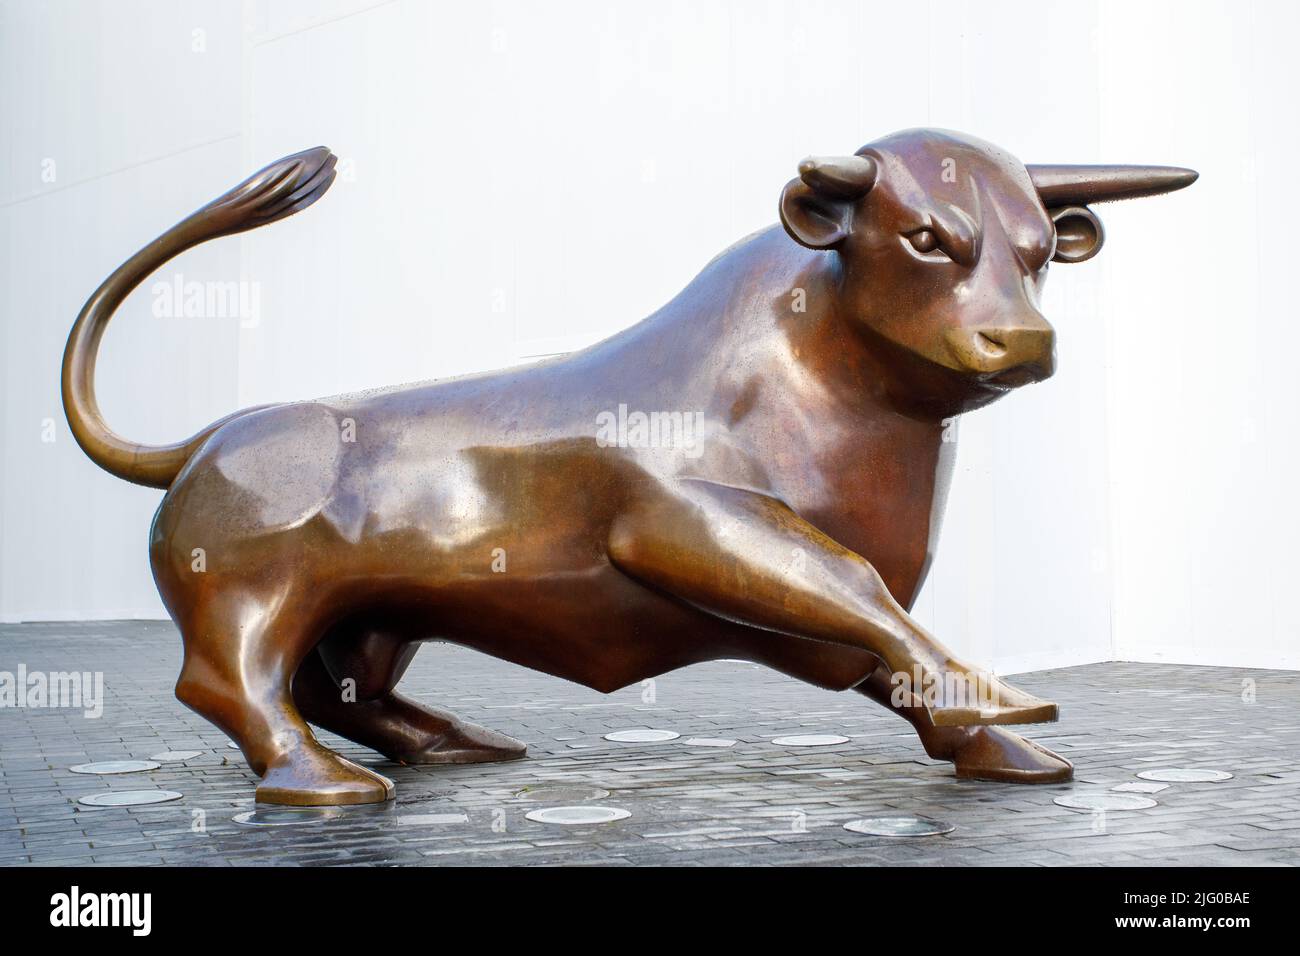 The bronze bull sculpture by Sculptor Laurence Broderick in Birmingham Bullring shopping centre, England, UK. Stock Photo